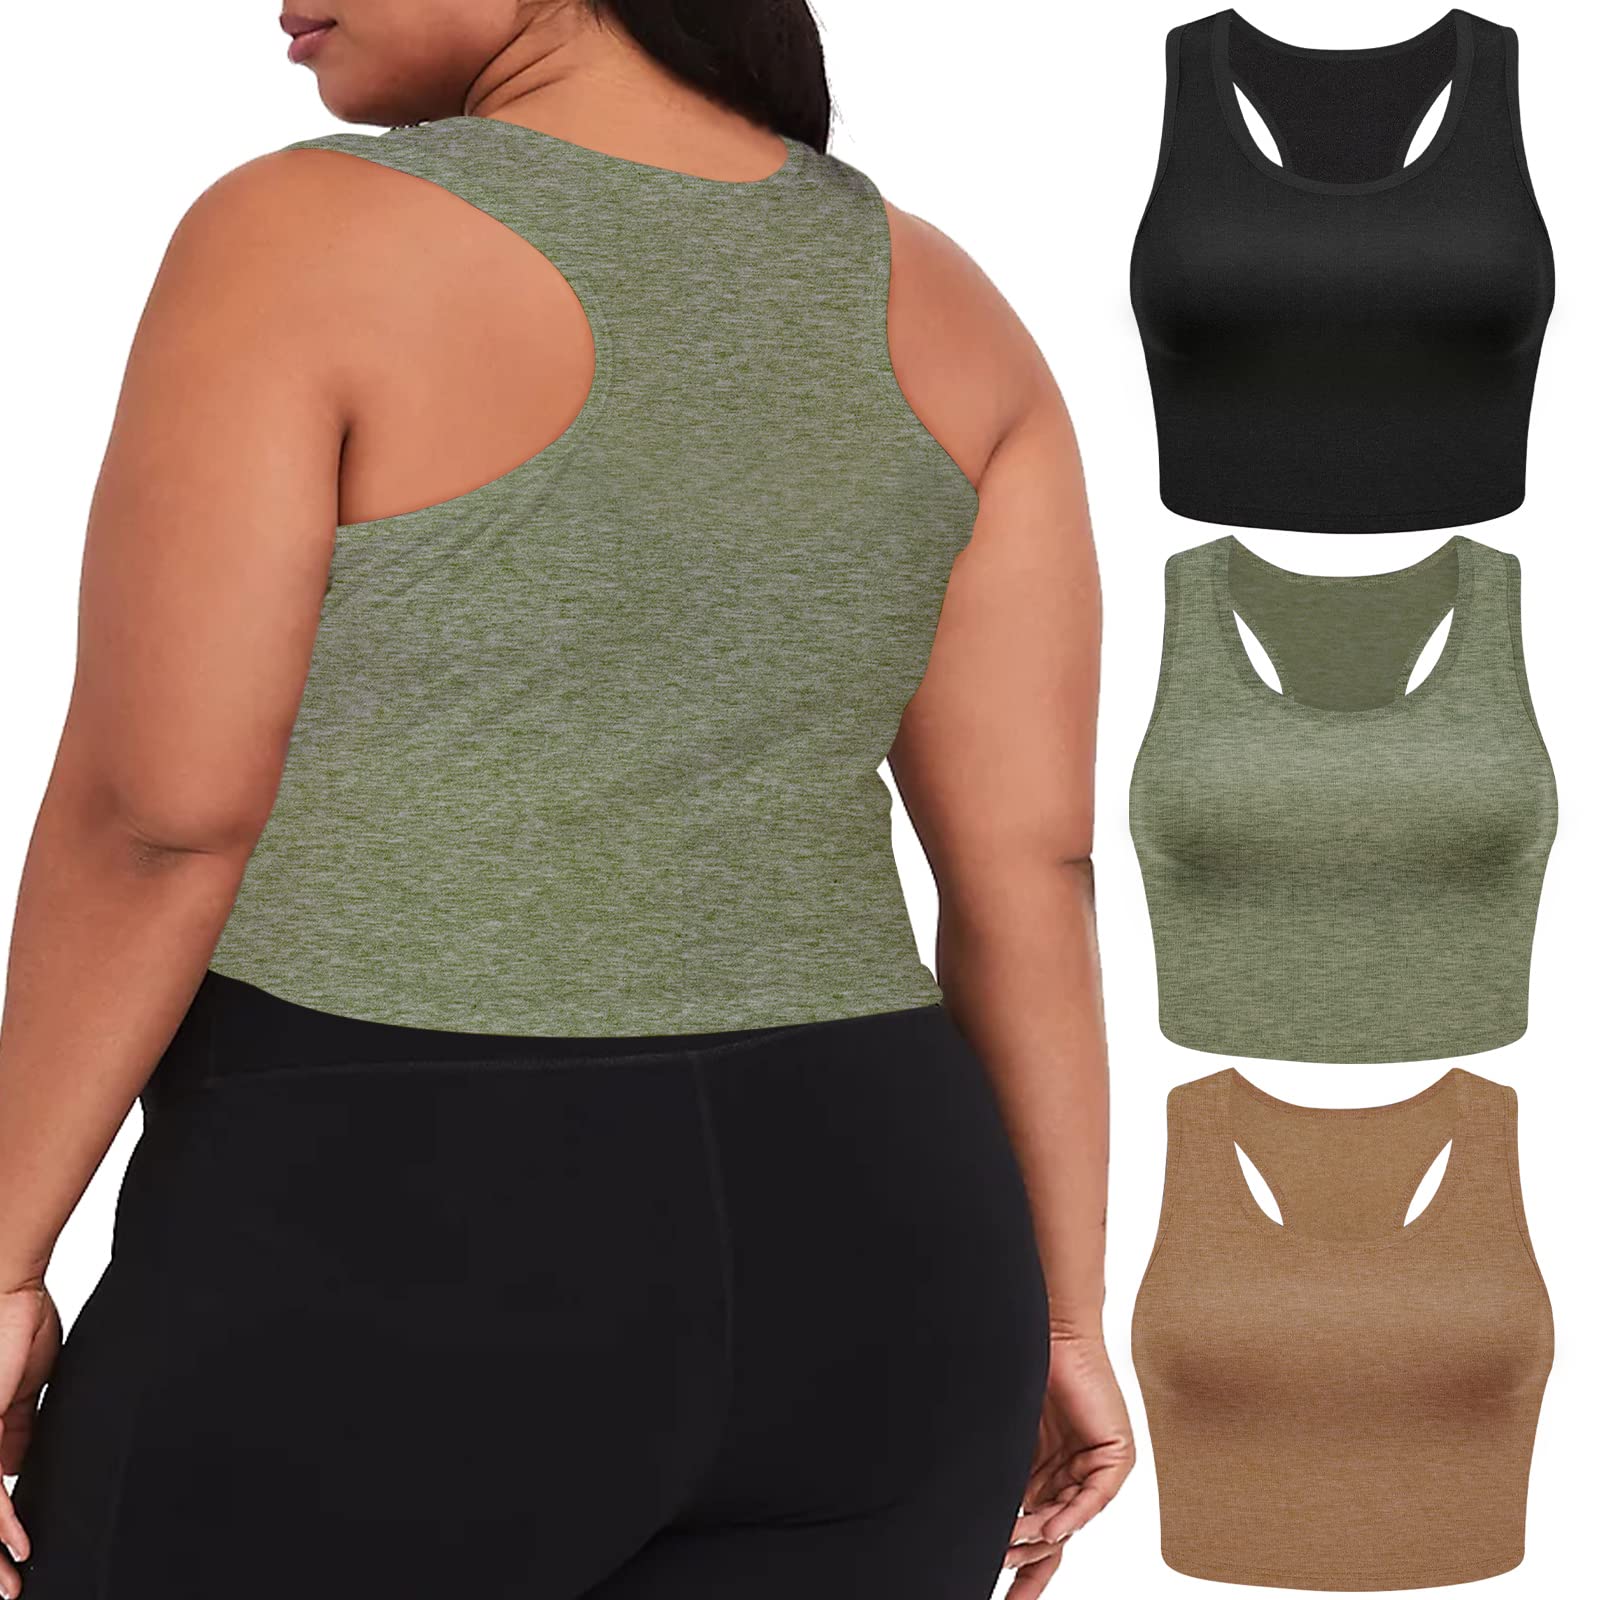 3 Pieces Basic Plus Size Tank Tops for Women-Black,Coffee,Army Green - Moon Wood